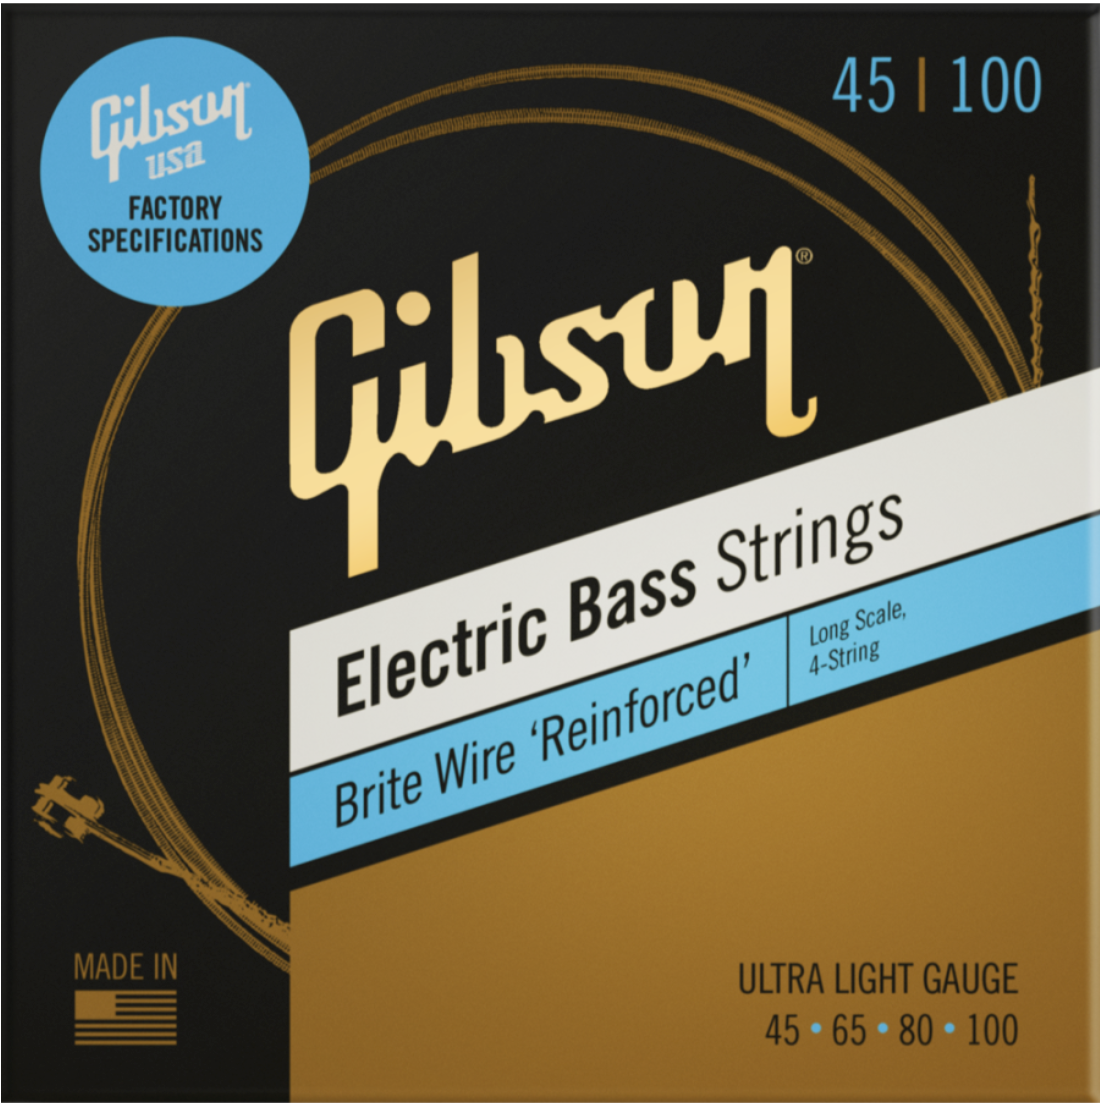 45-100 Long Scale Brite Wire Electric Bass Strings, 4-String, Roundwound Ultra-Light